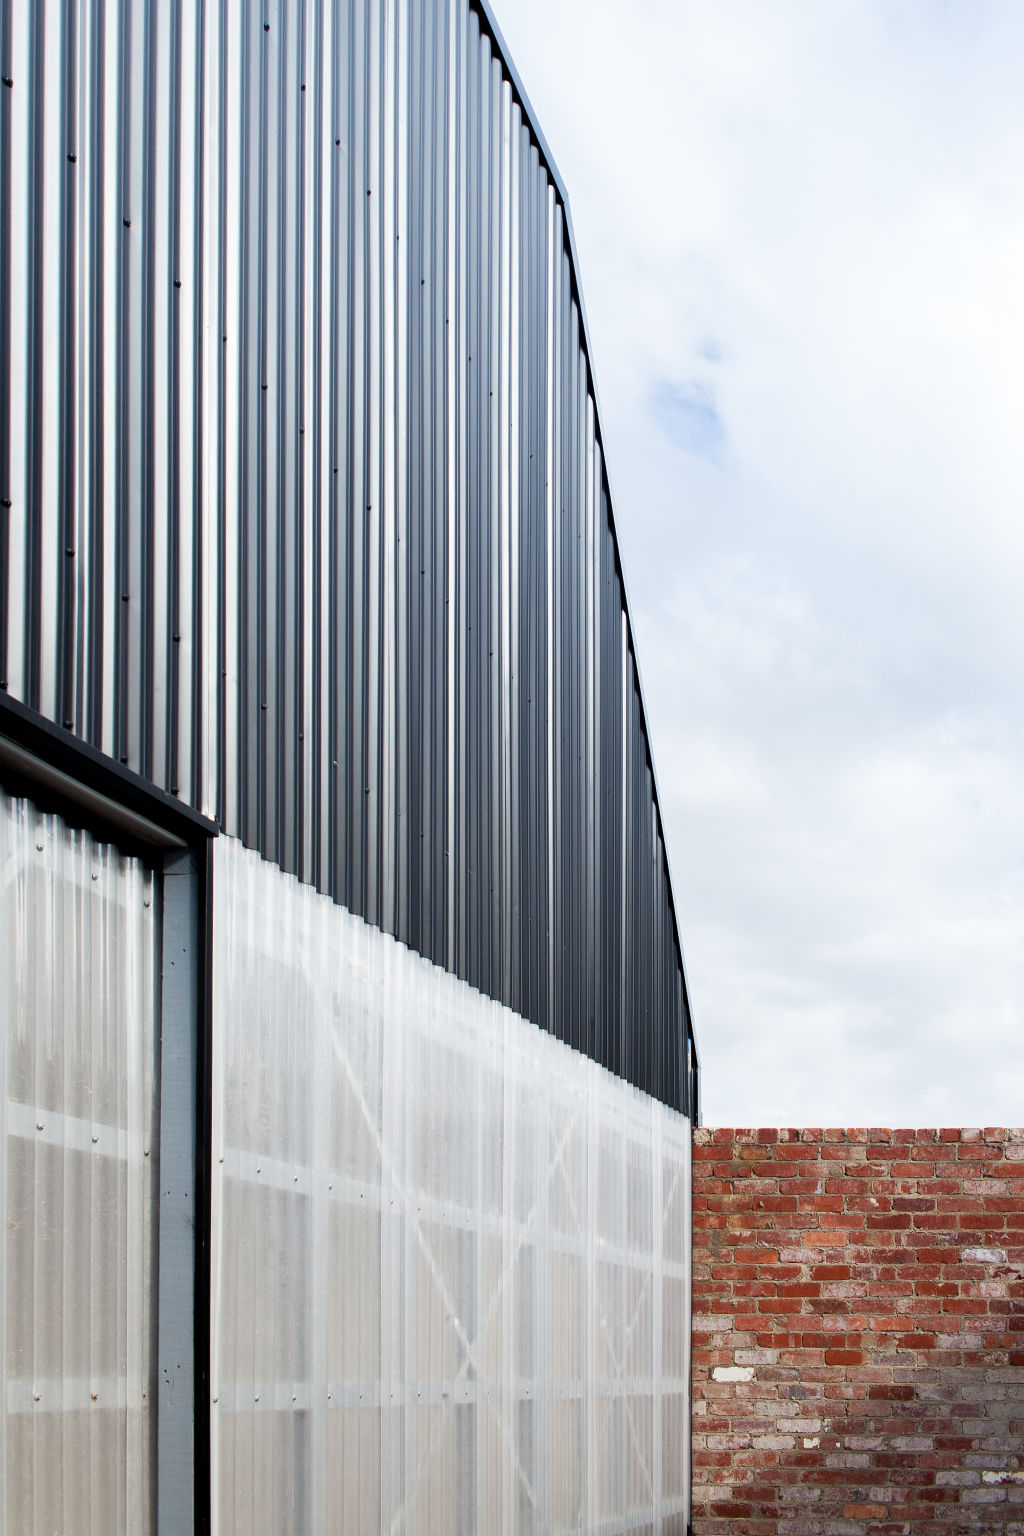 The laneway's brick facade is made from recycled materials.